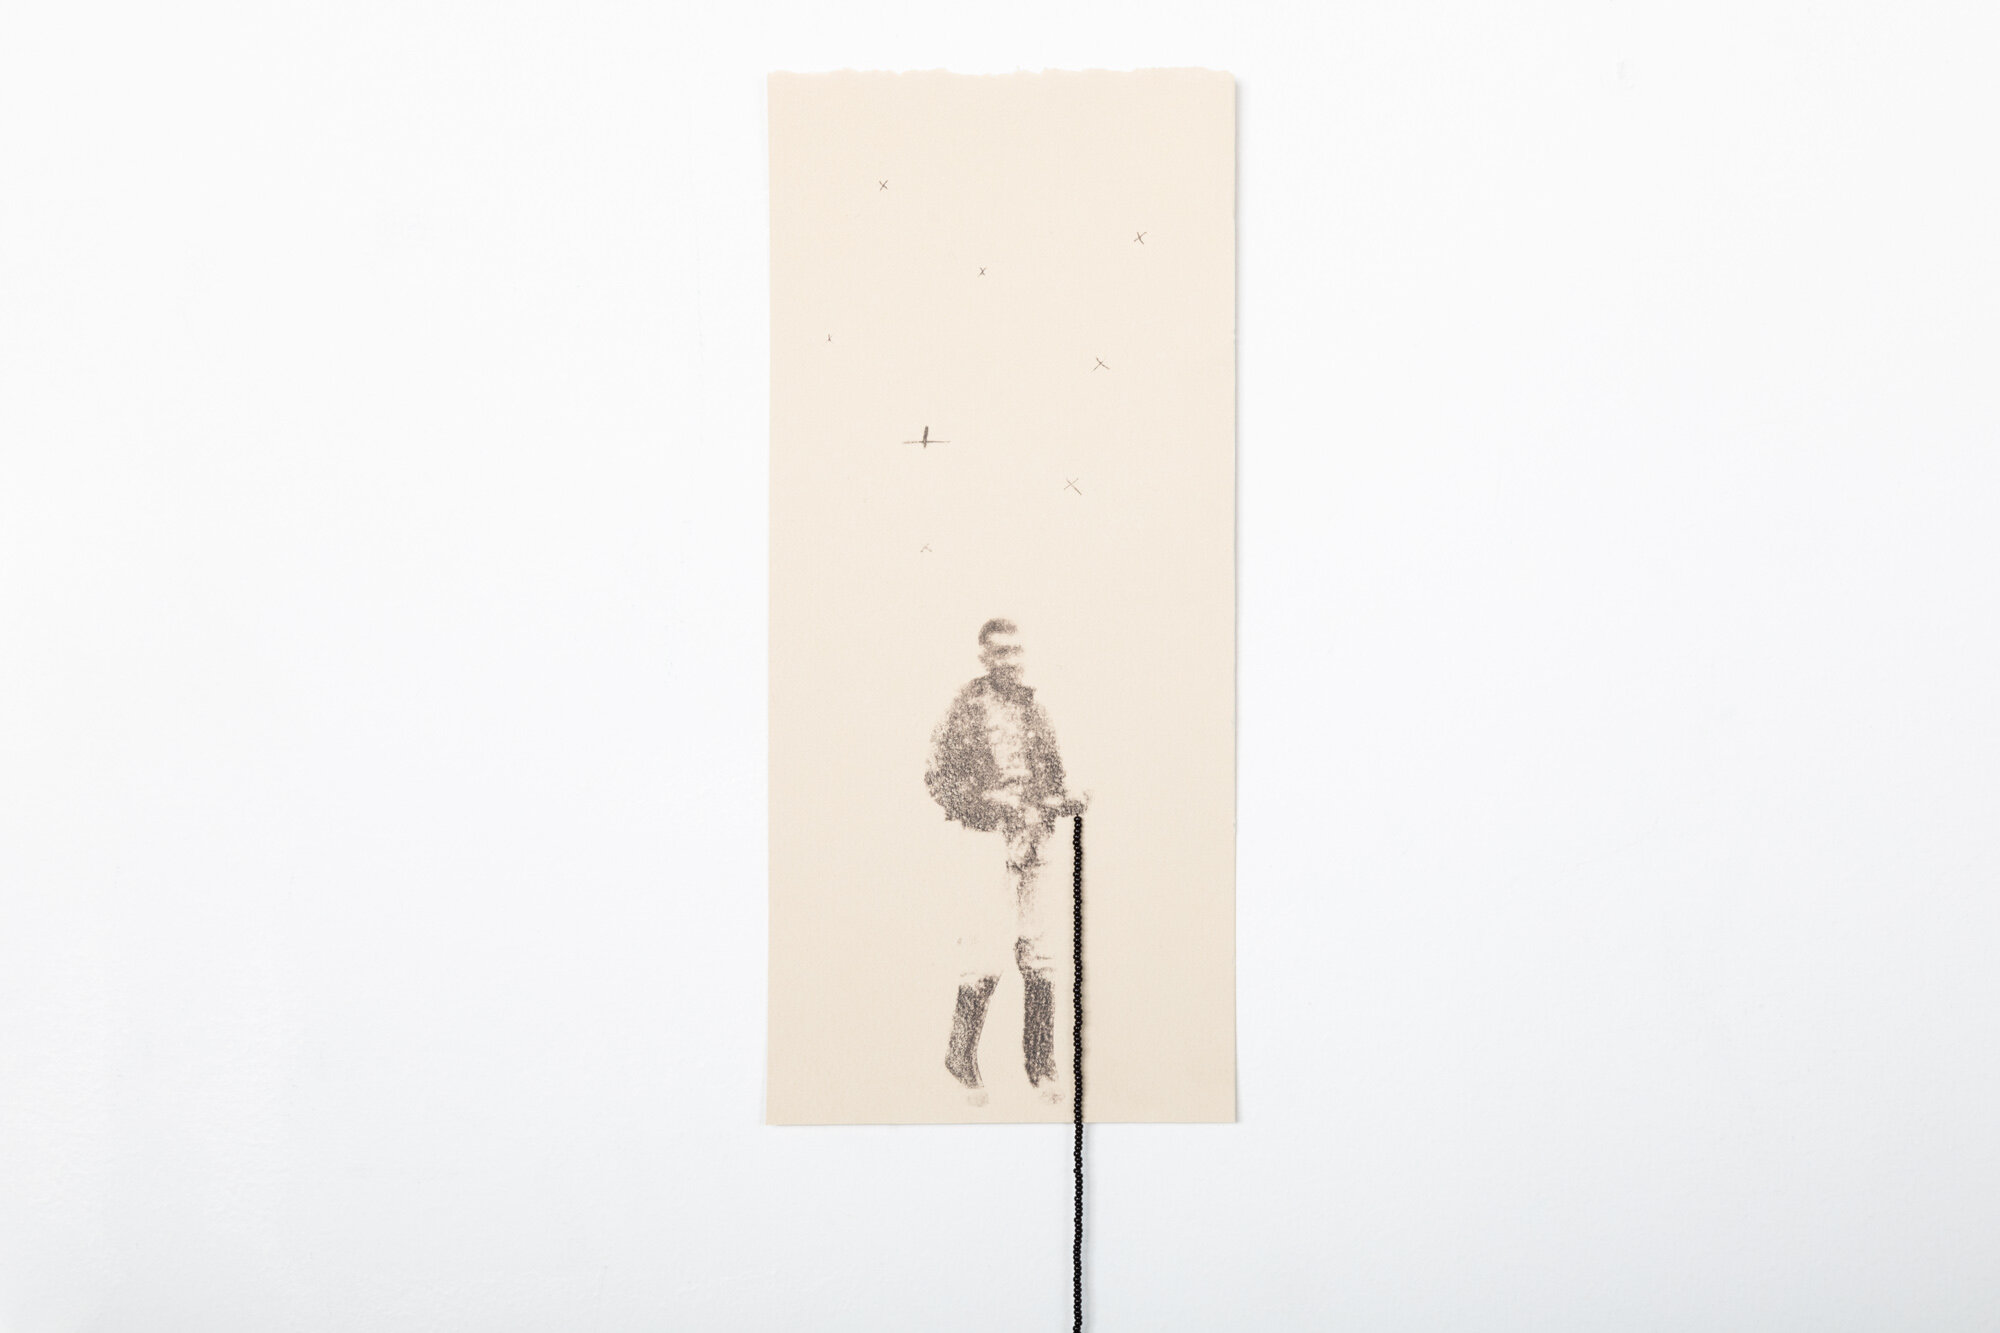  10" x 4.5”, Image Transfer and Beads on Paper, 2019 